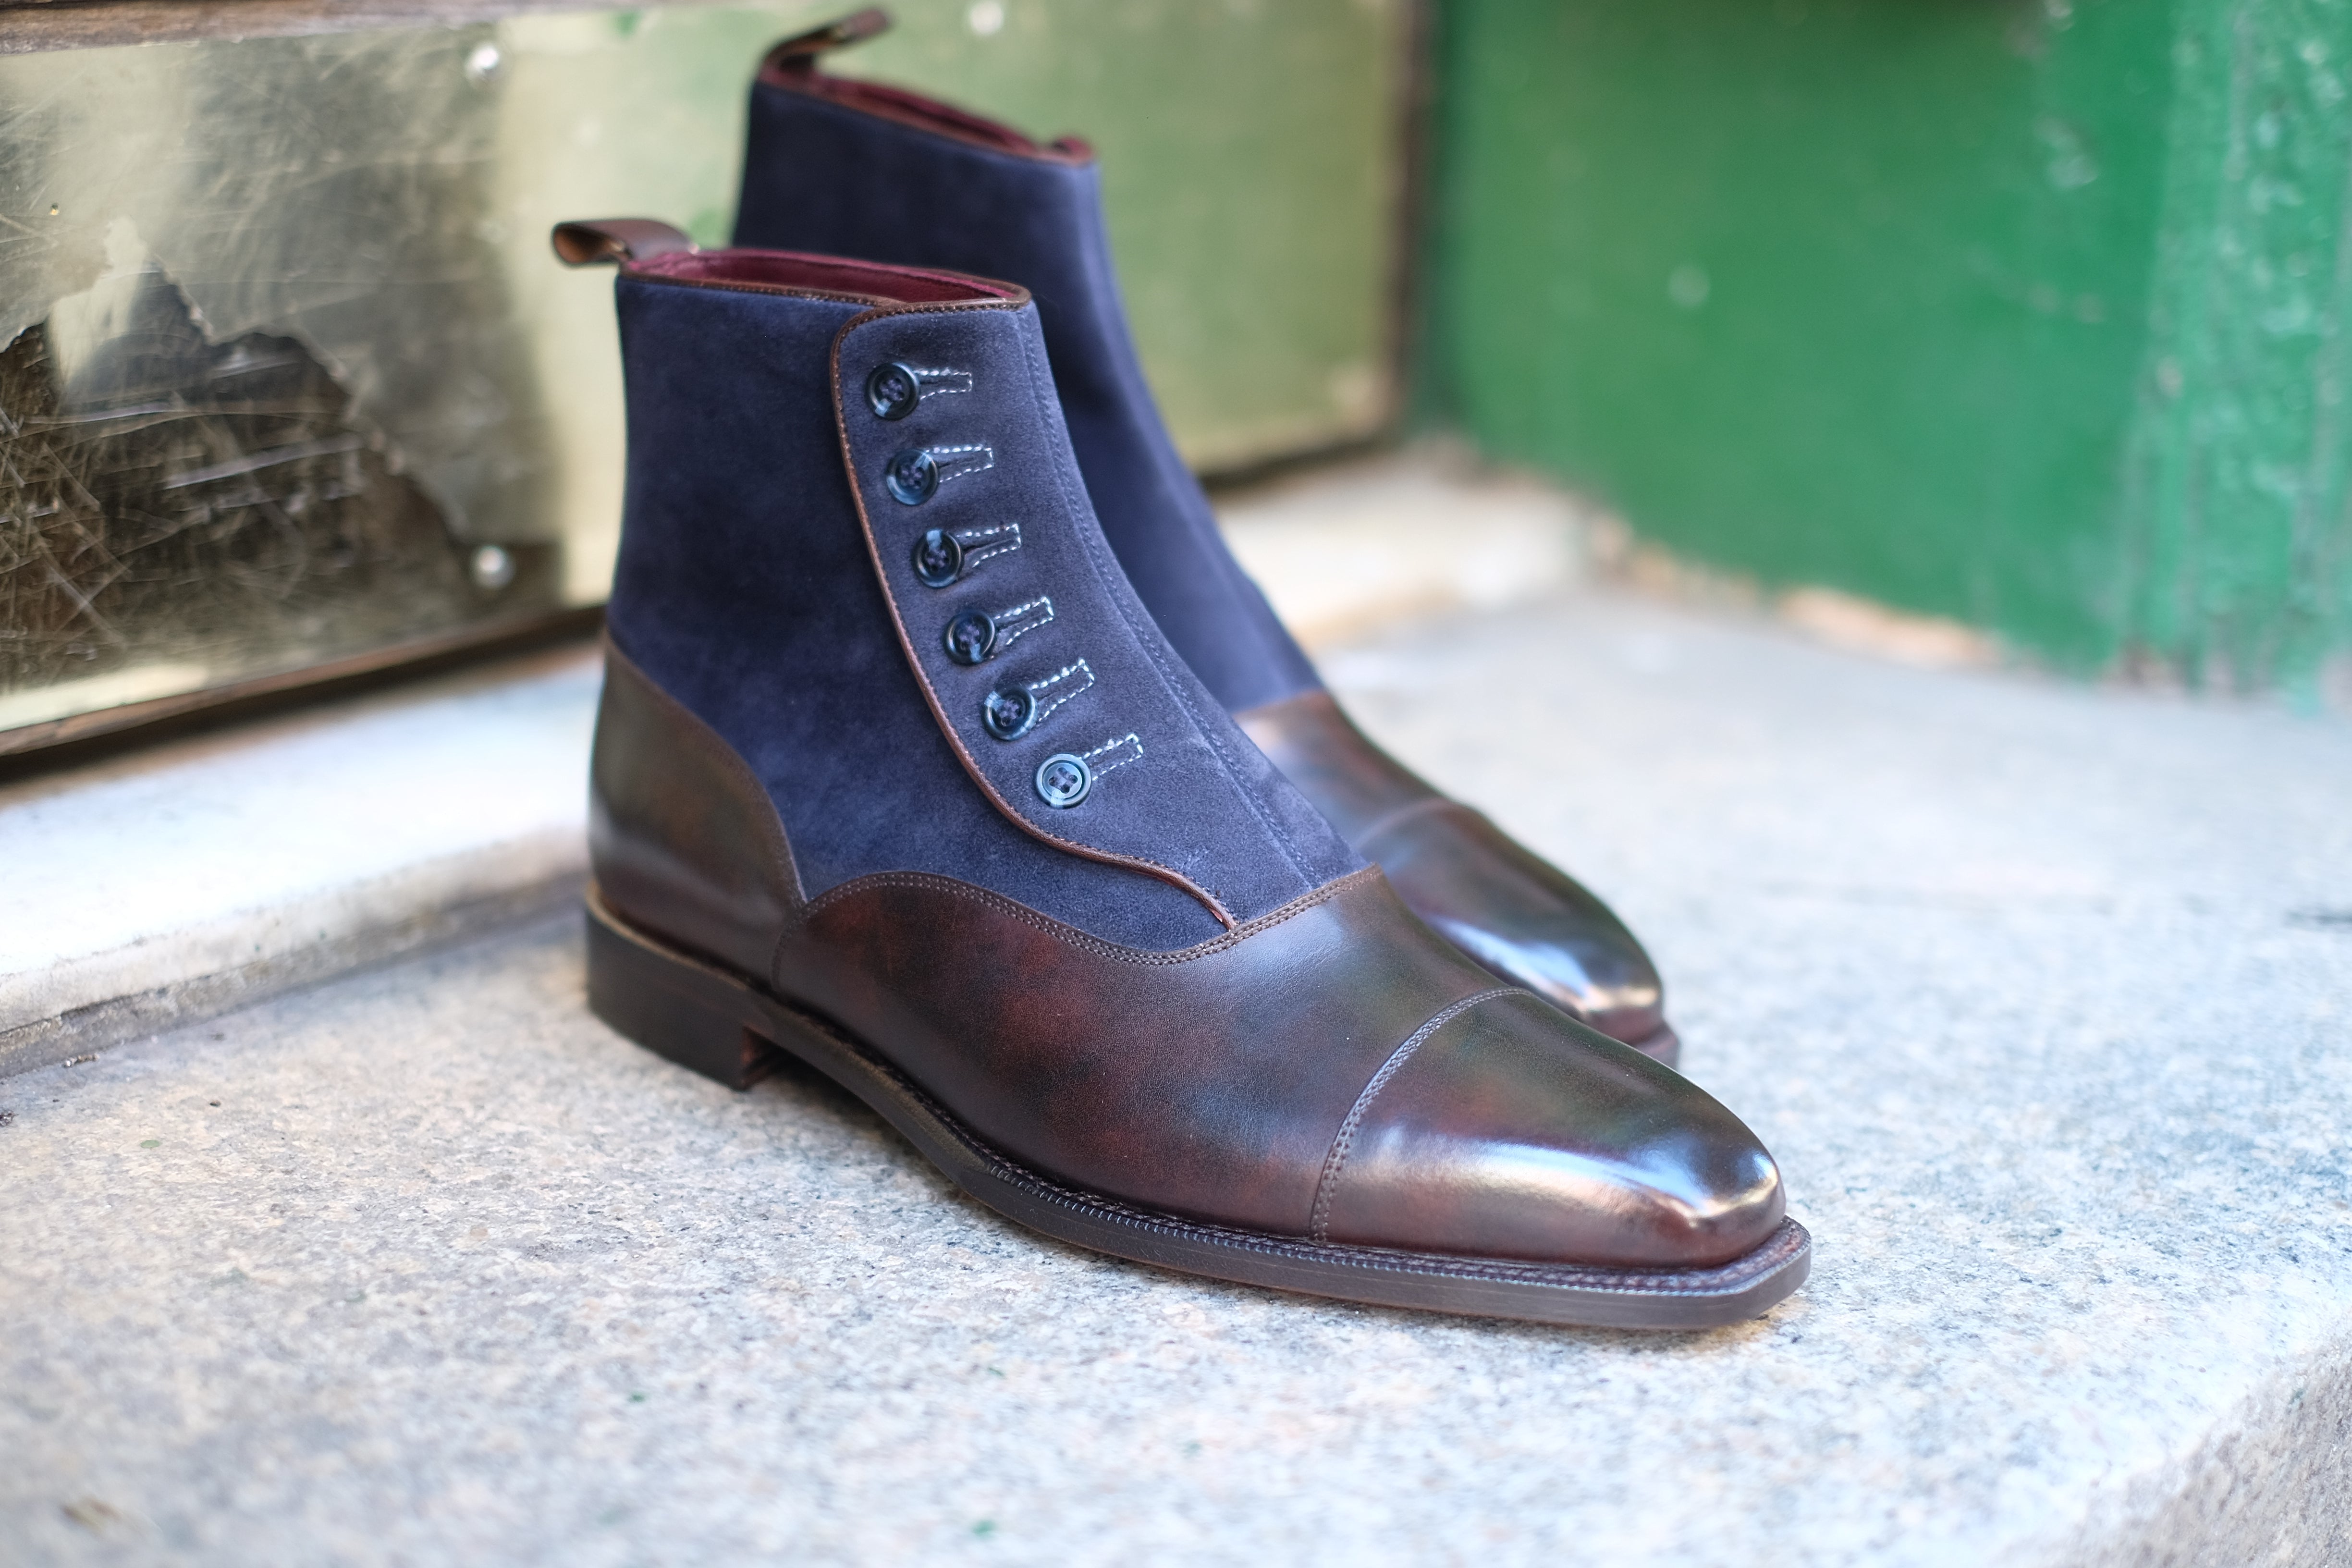 Bellevue - MTO - Dark Brown Museum Calf / Navy Suede - Sky Blue Stitching - Blue Buttons - MGF Last - Single Leather Sole